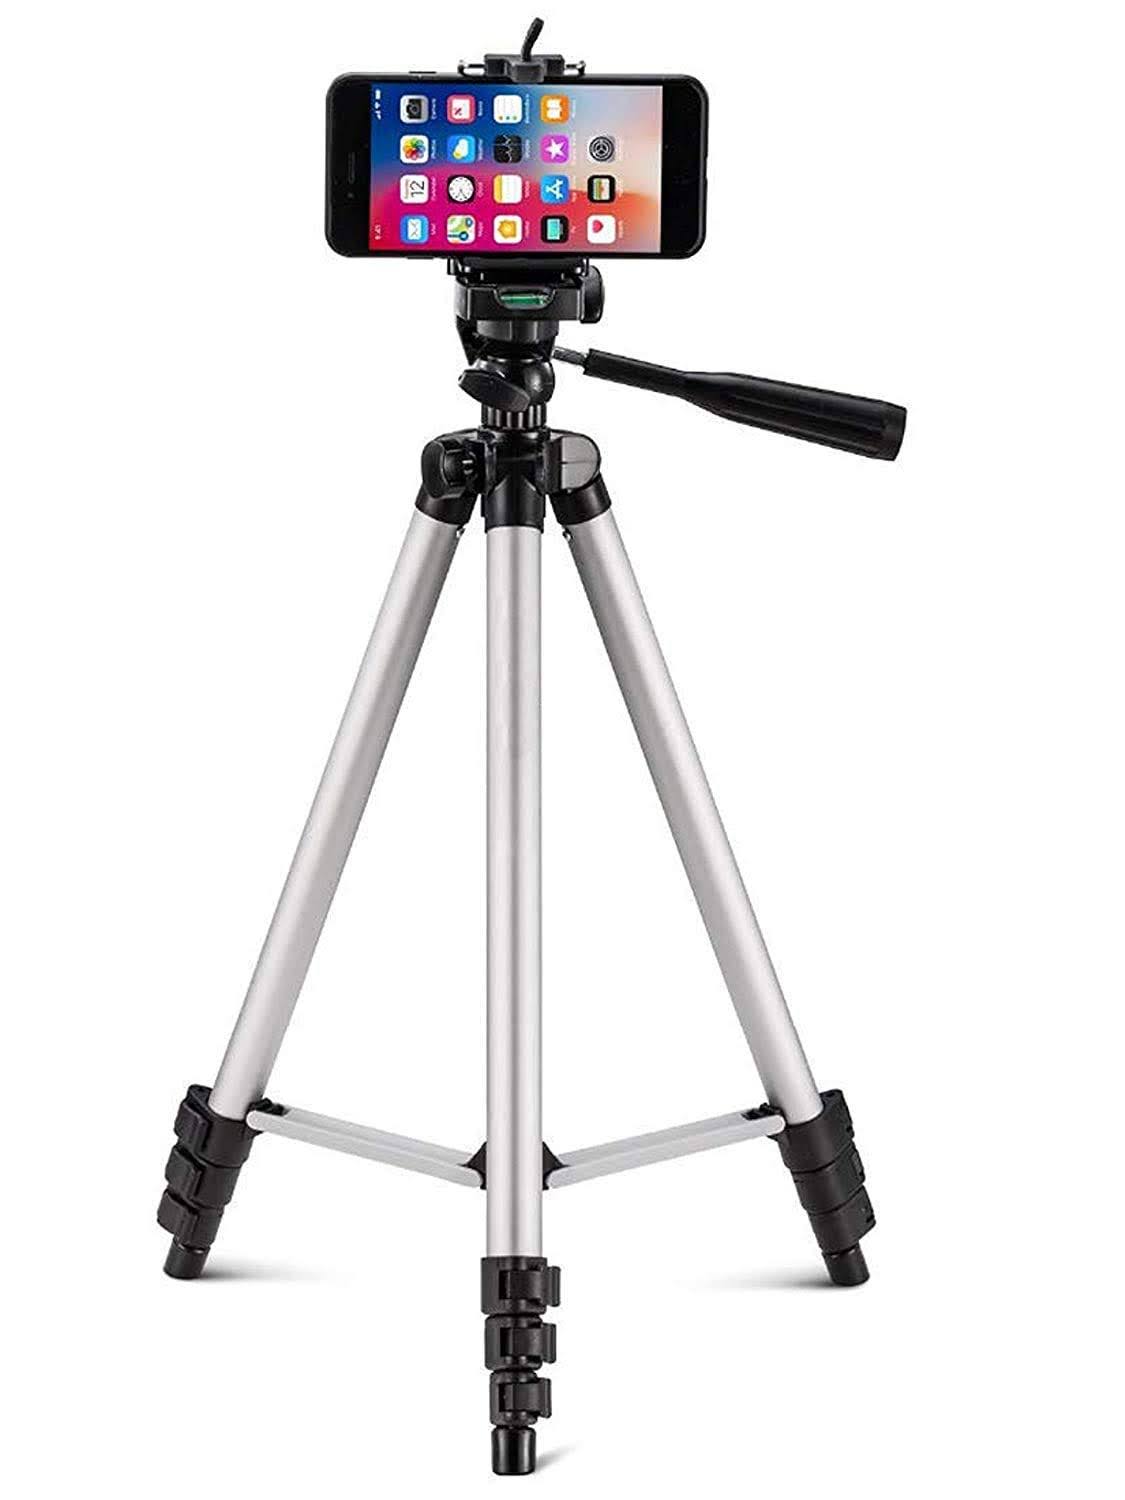 PremiumAV Launches 60 Inch Compact Tripod with Hybrid Head for Smartphones